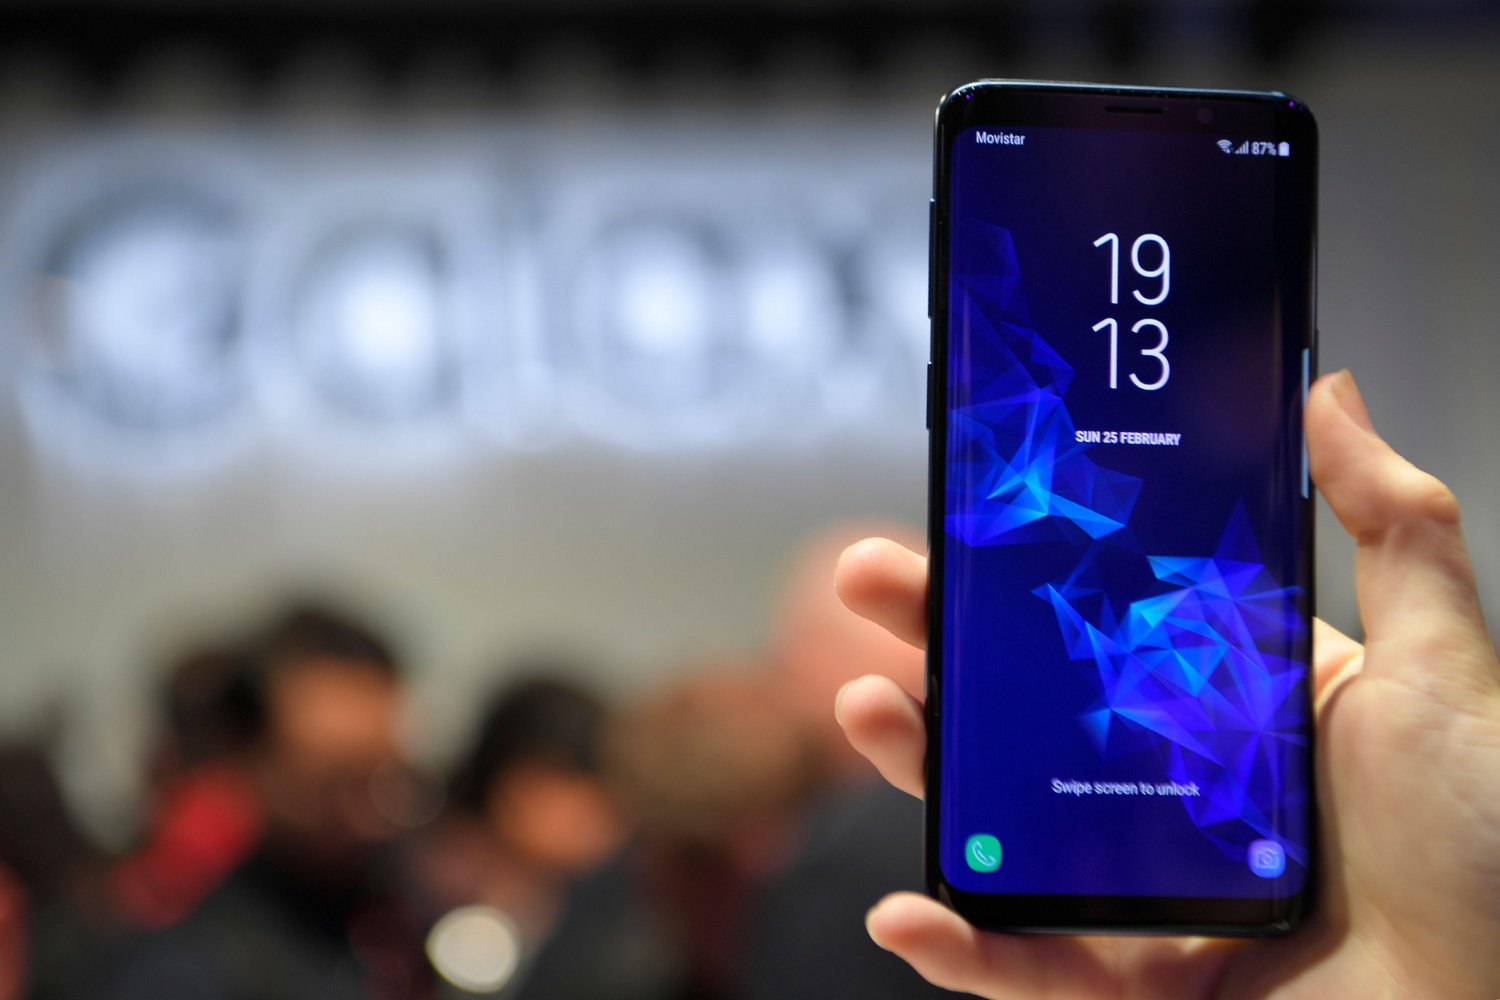 FM Radio Support Is Heading To The US Unlocked Galaxy S9, S9 Plus